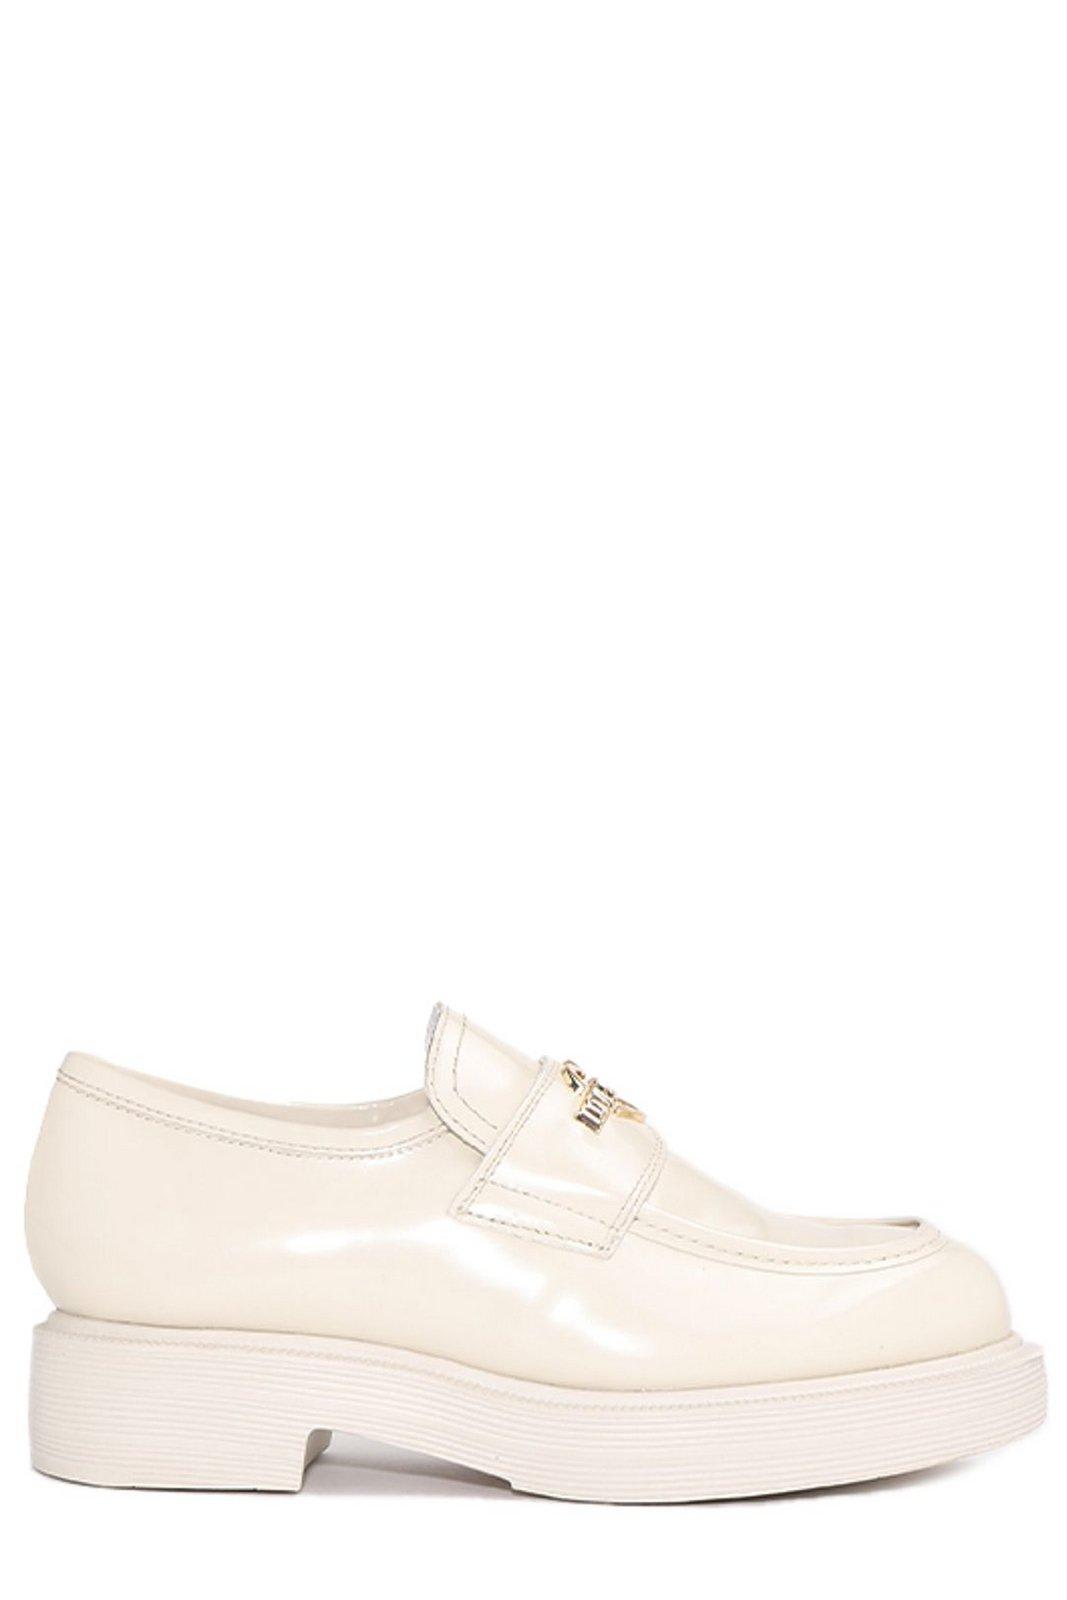 Love Moschino Logo-plaque Round Toe Chunky Loafers